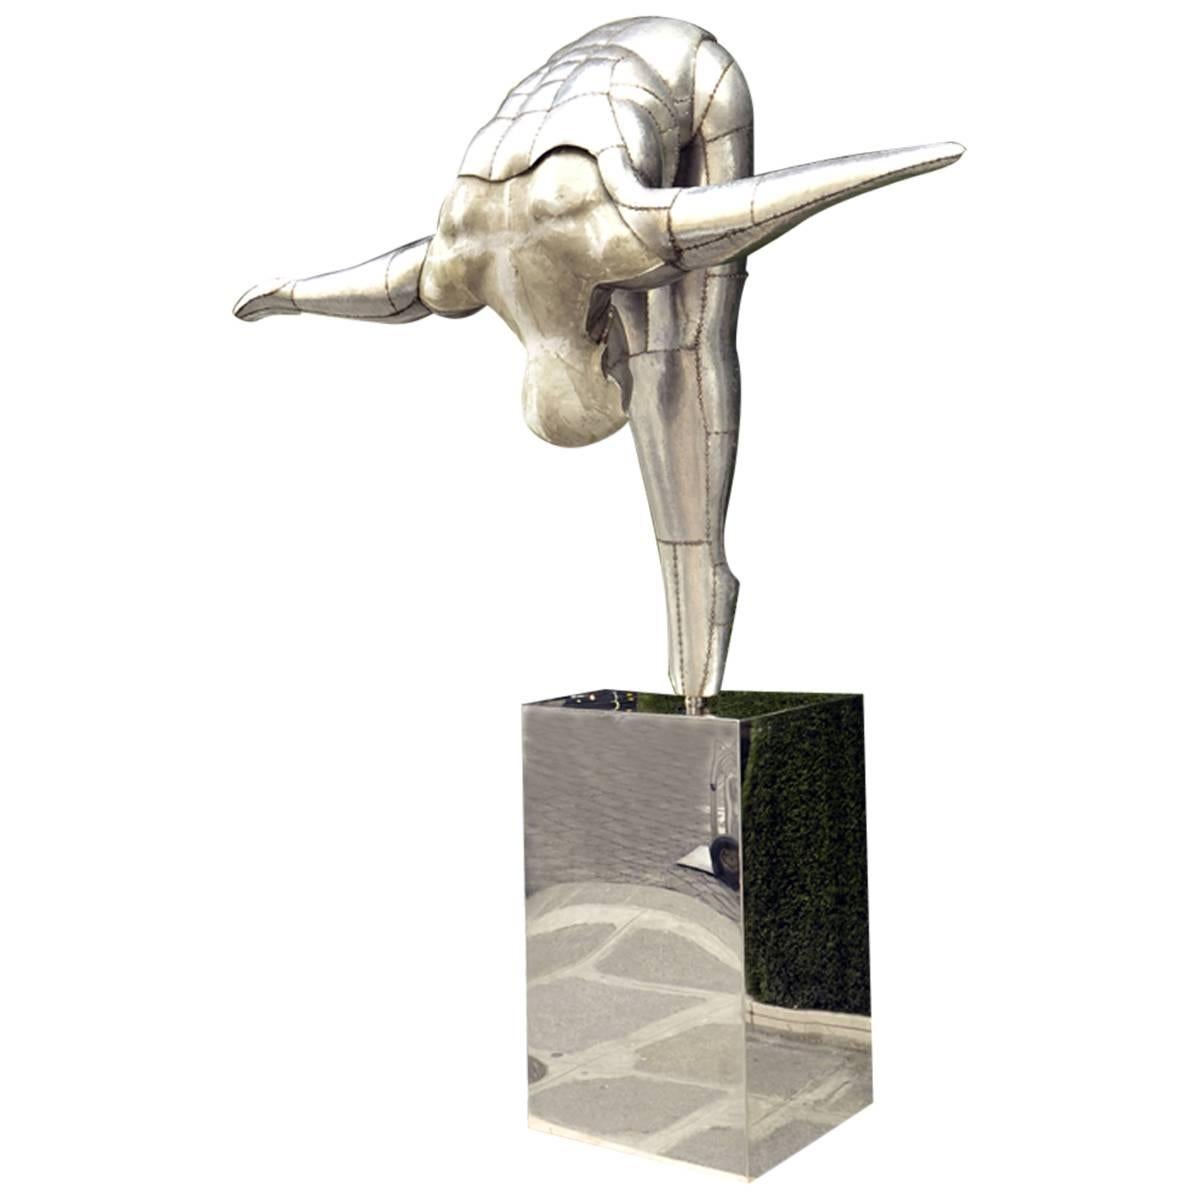 Sculpture Diver in Welded Metal on Stainless Steel Mirror Base